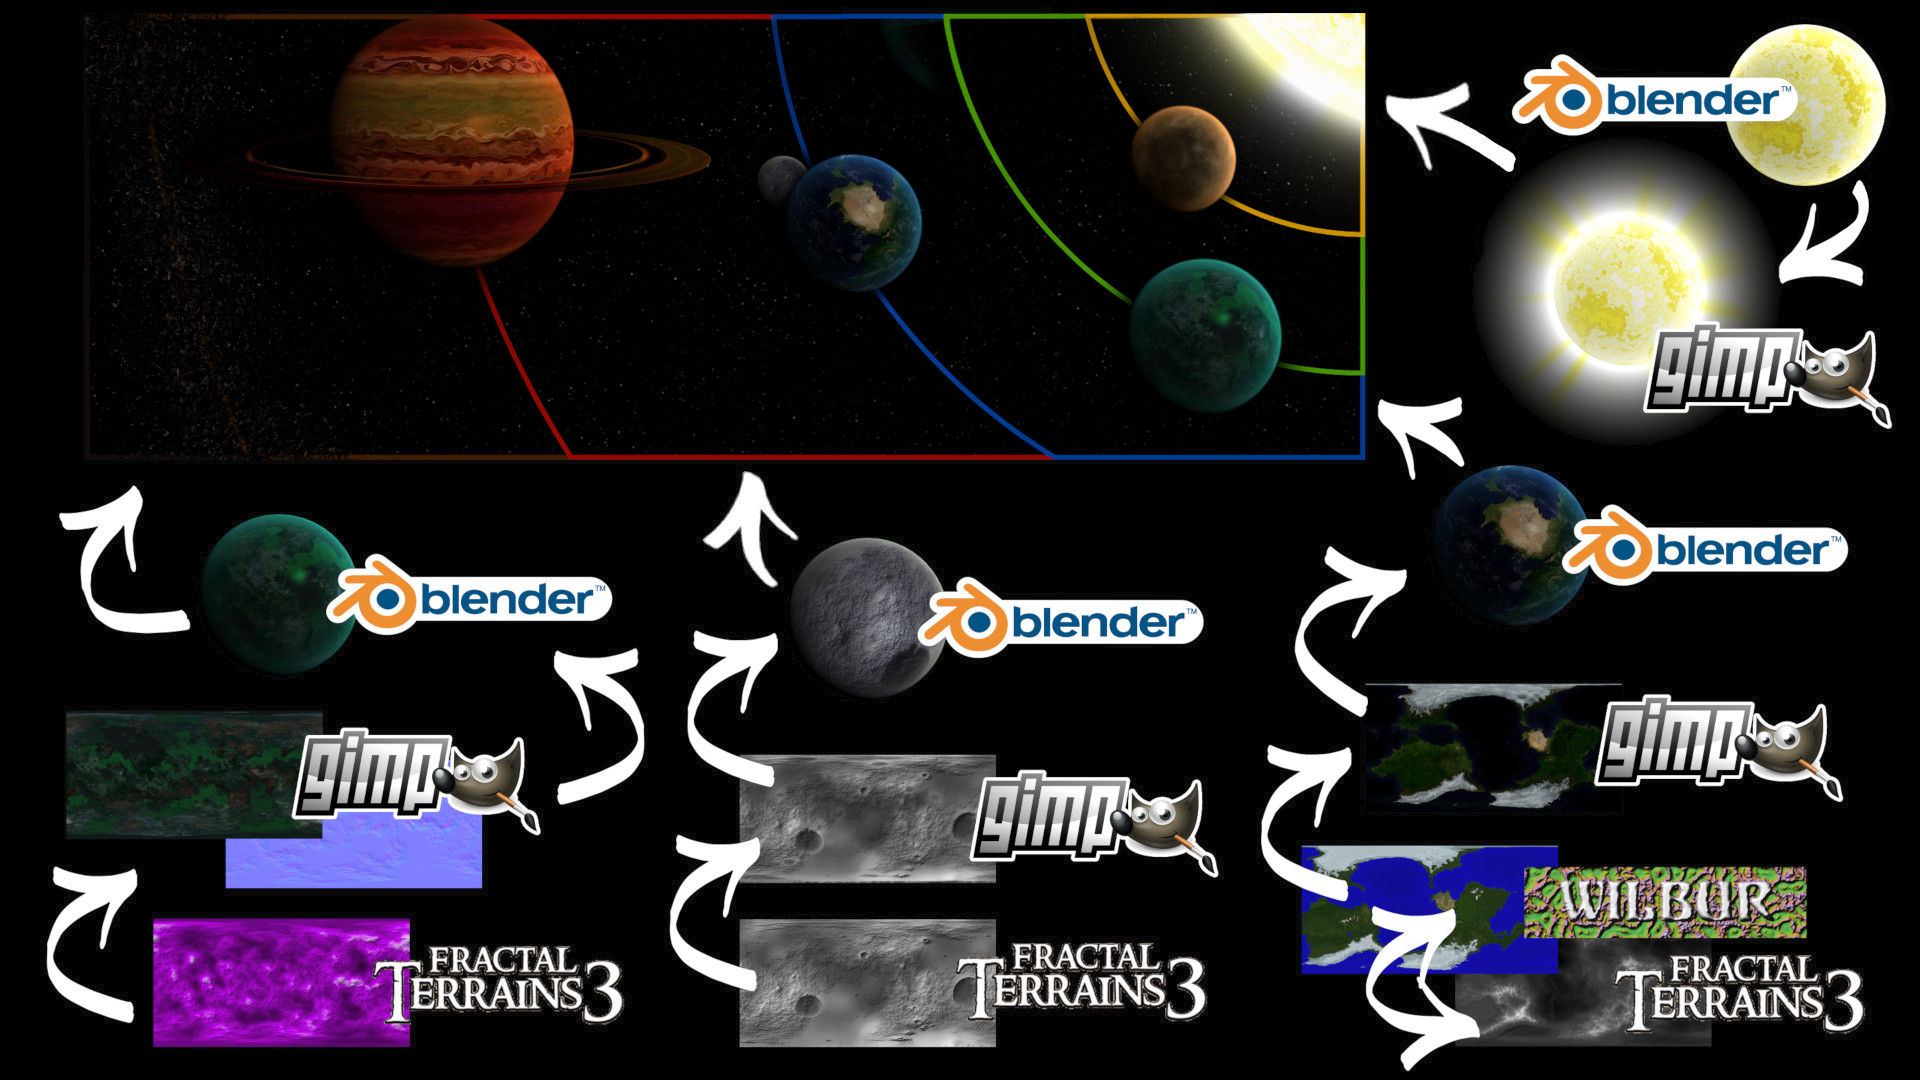 Solar system diagram showing creative workflow using open source software The GIMP, Blender, Wilbur and Fractal Terrains 3. Immersive & scientifically inspired style.